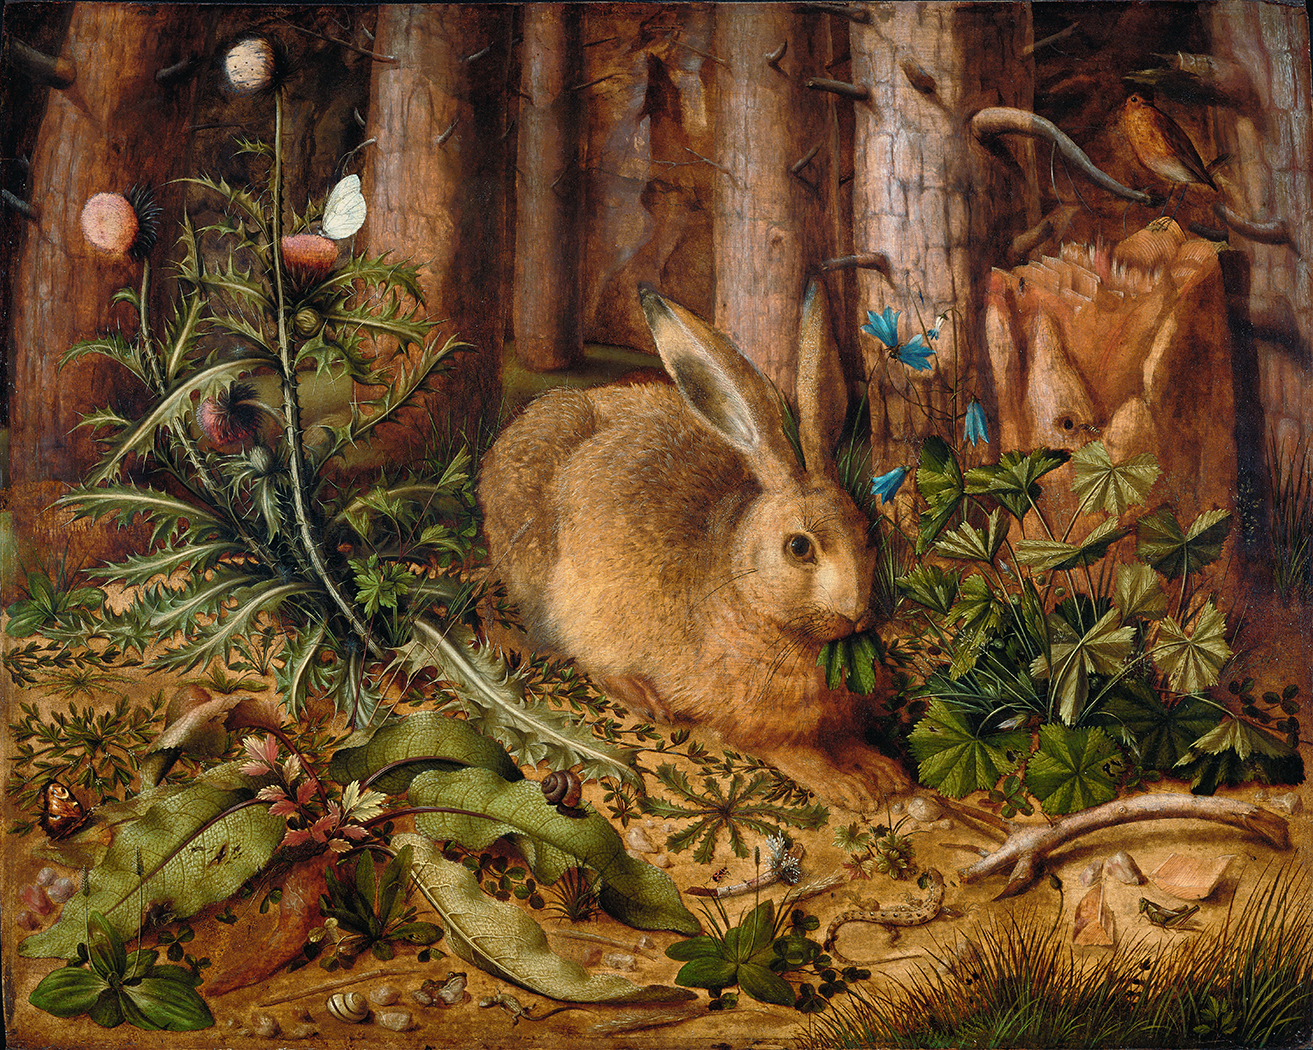 Rabbit in Forest Oil Painting Print on ...